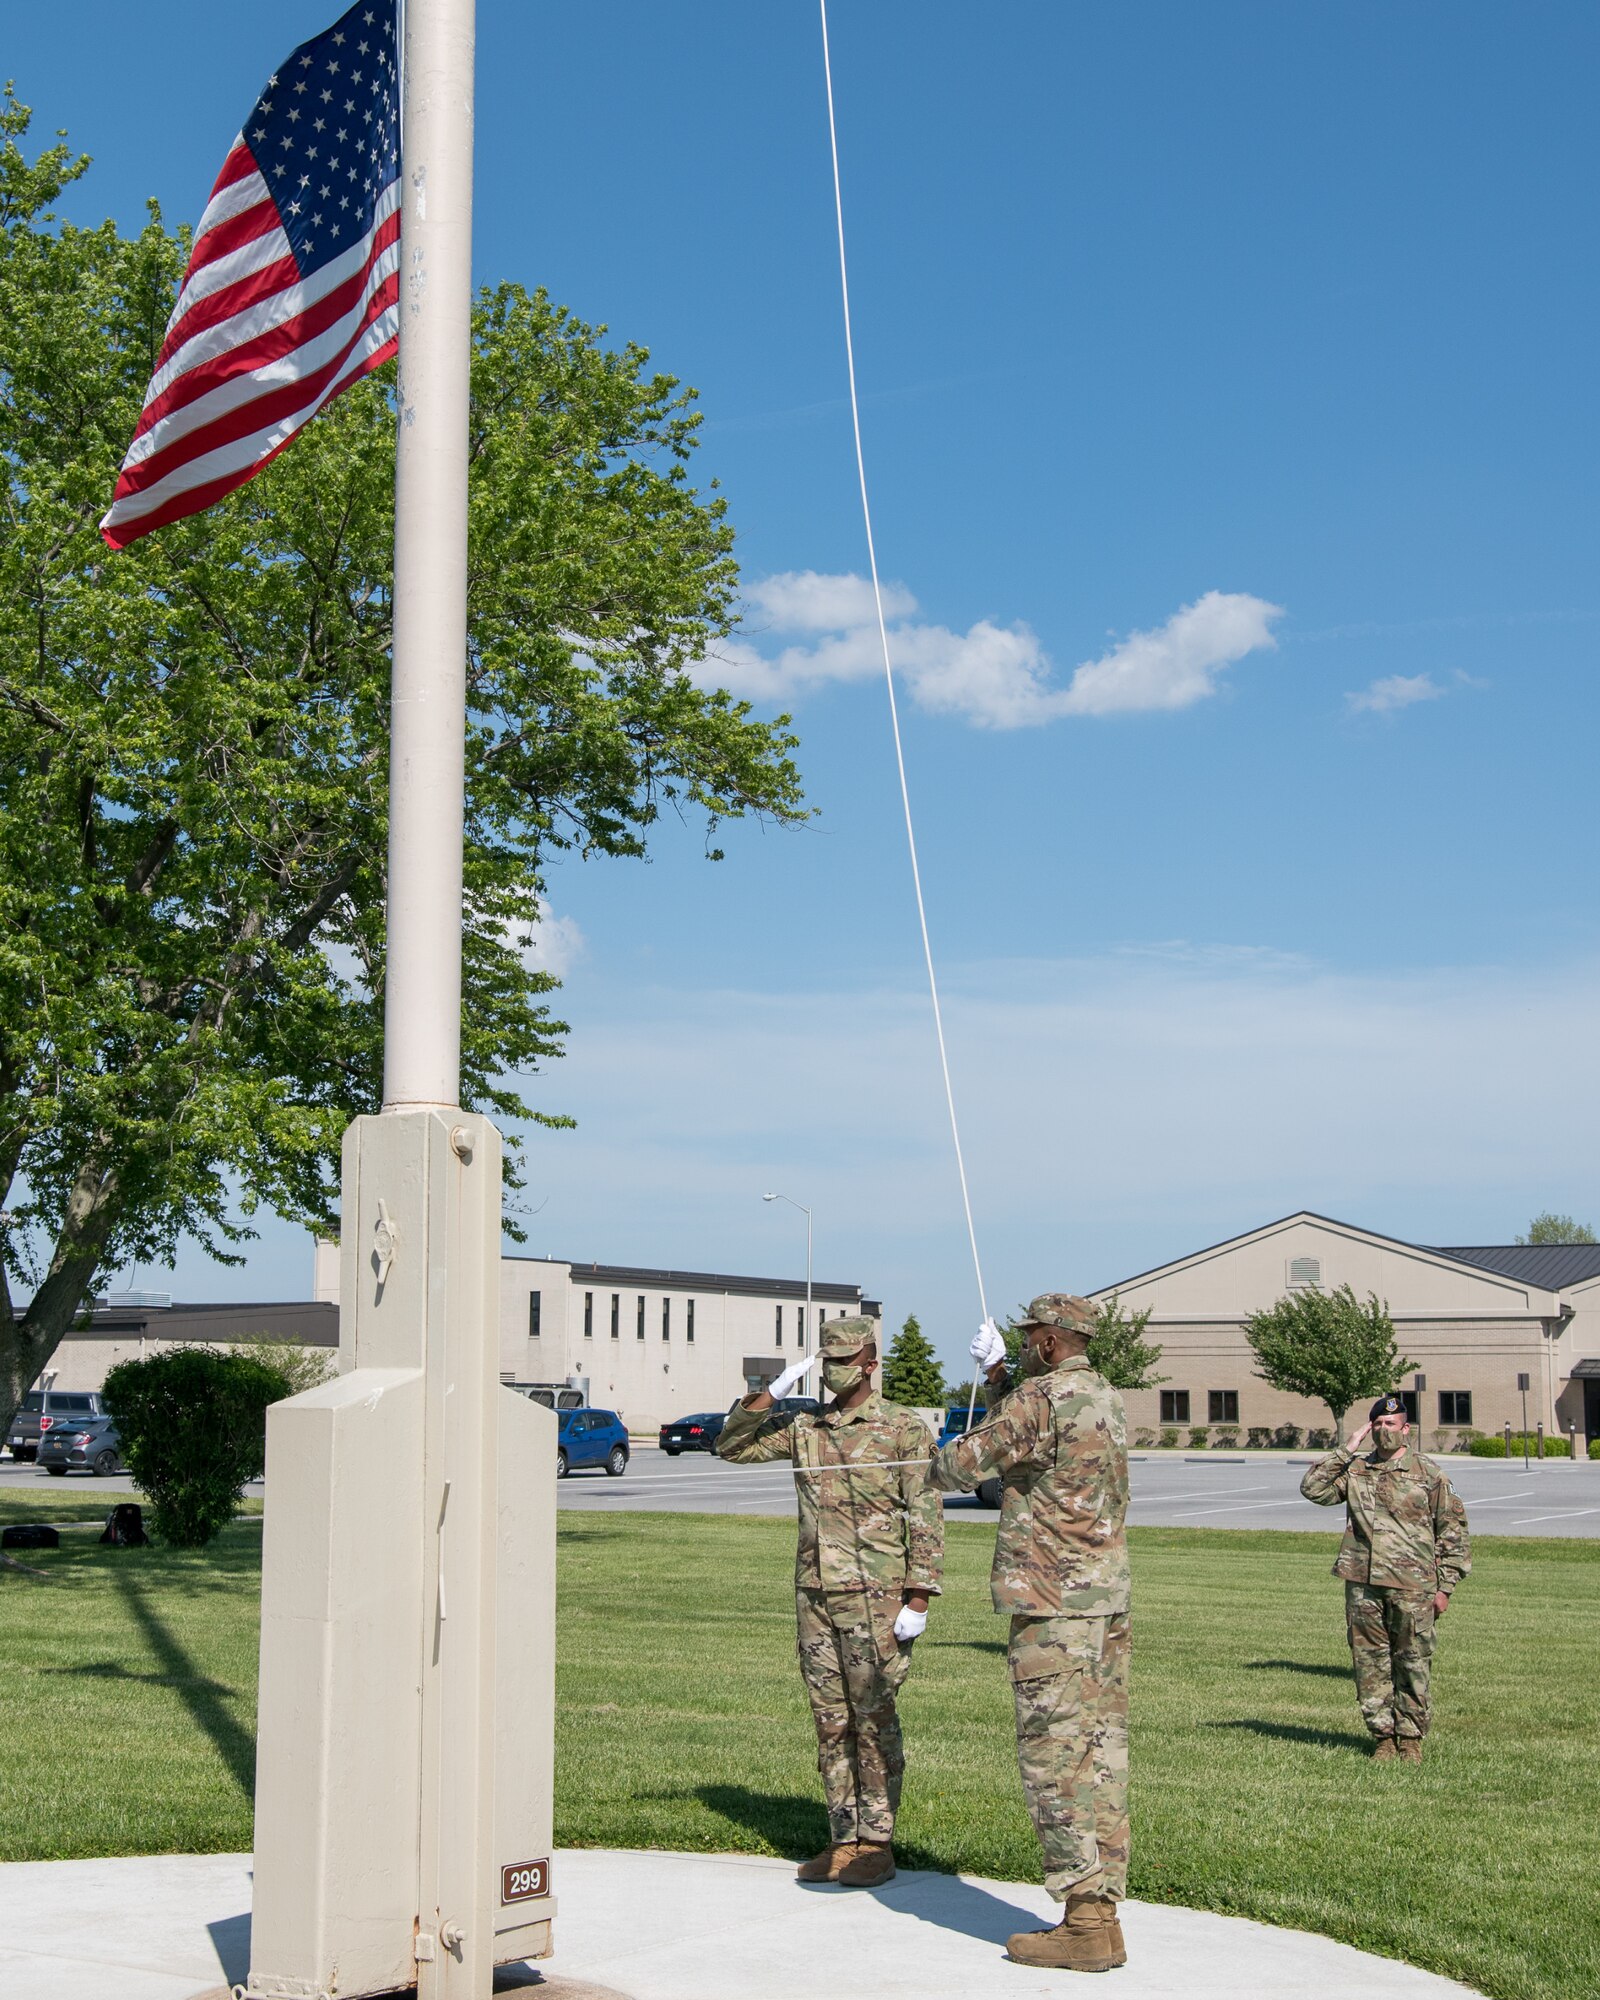 Members of the Dover Air Force Base Honor Guard lower the American flag during a retreat ceremony on Peace Officers Memorial Day May 15, 2020, at Dover Air Force Base, Delaware. The ceremony commemorating fallen military and civilian law enforcement officers marked the end of National Police Week 2020. (U.S. Air Force photo by Mauricio Campino)